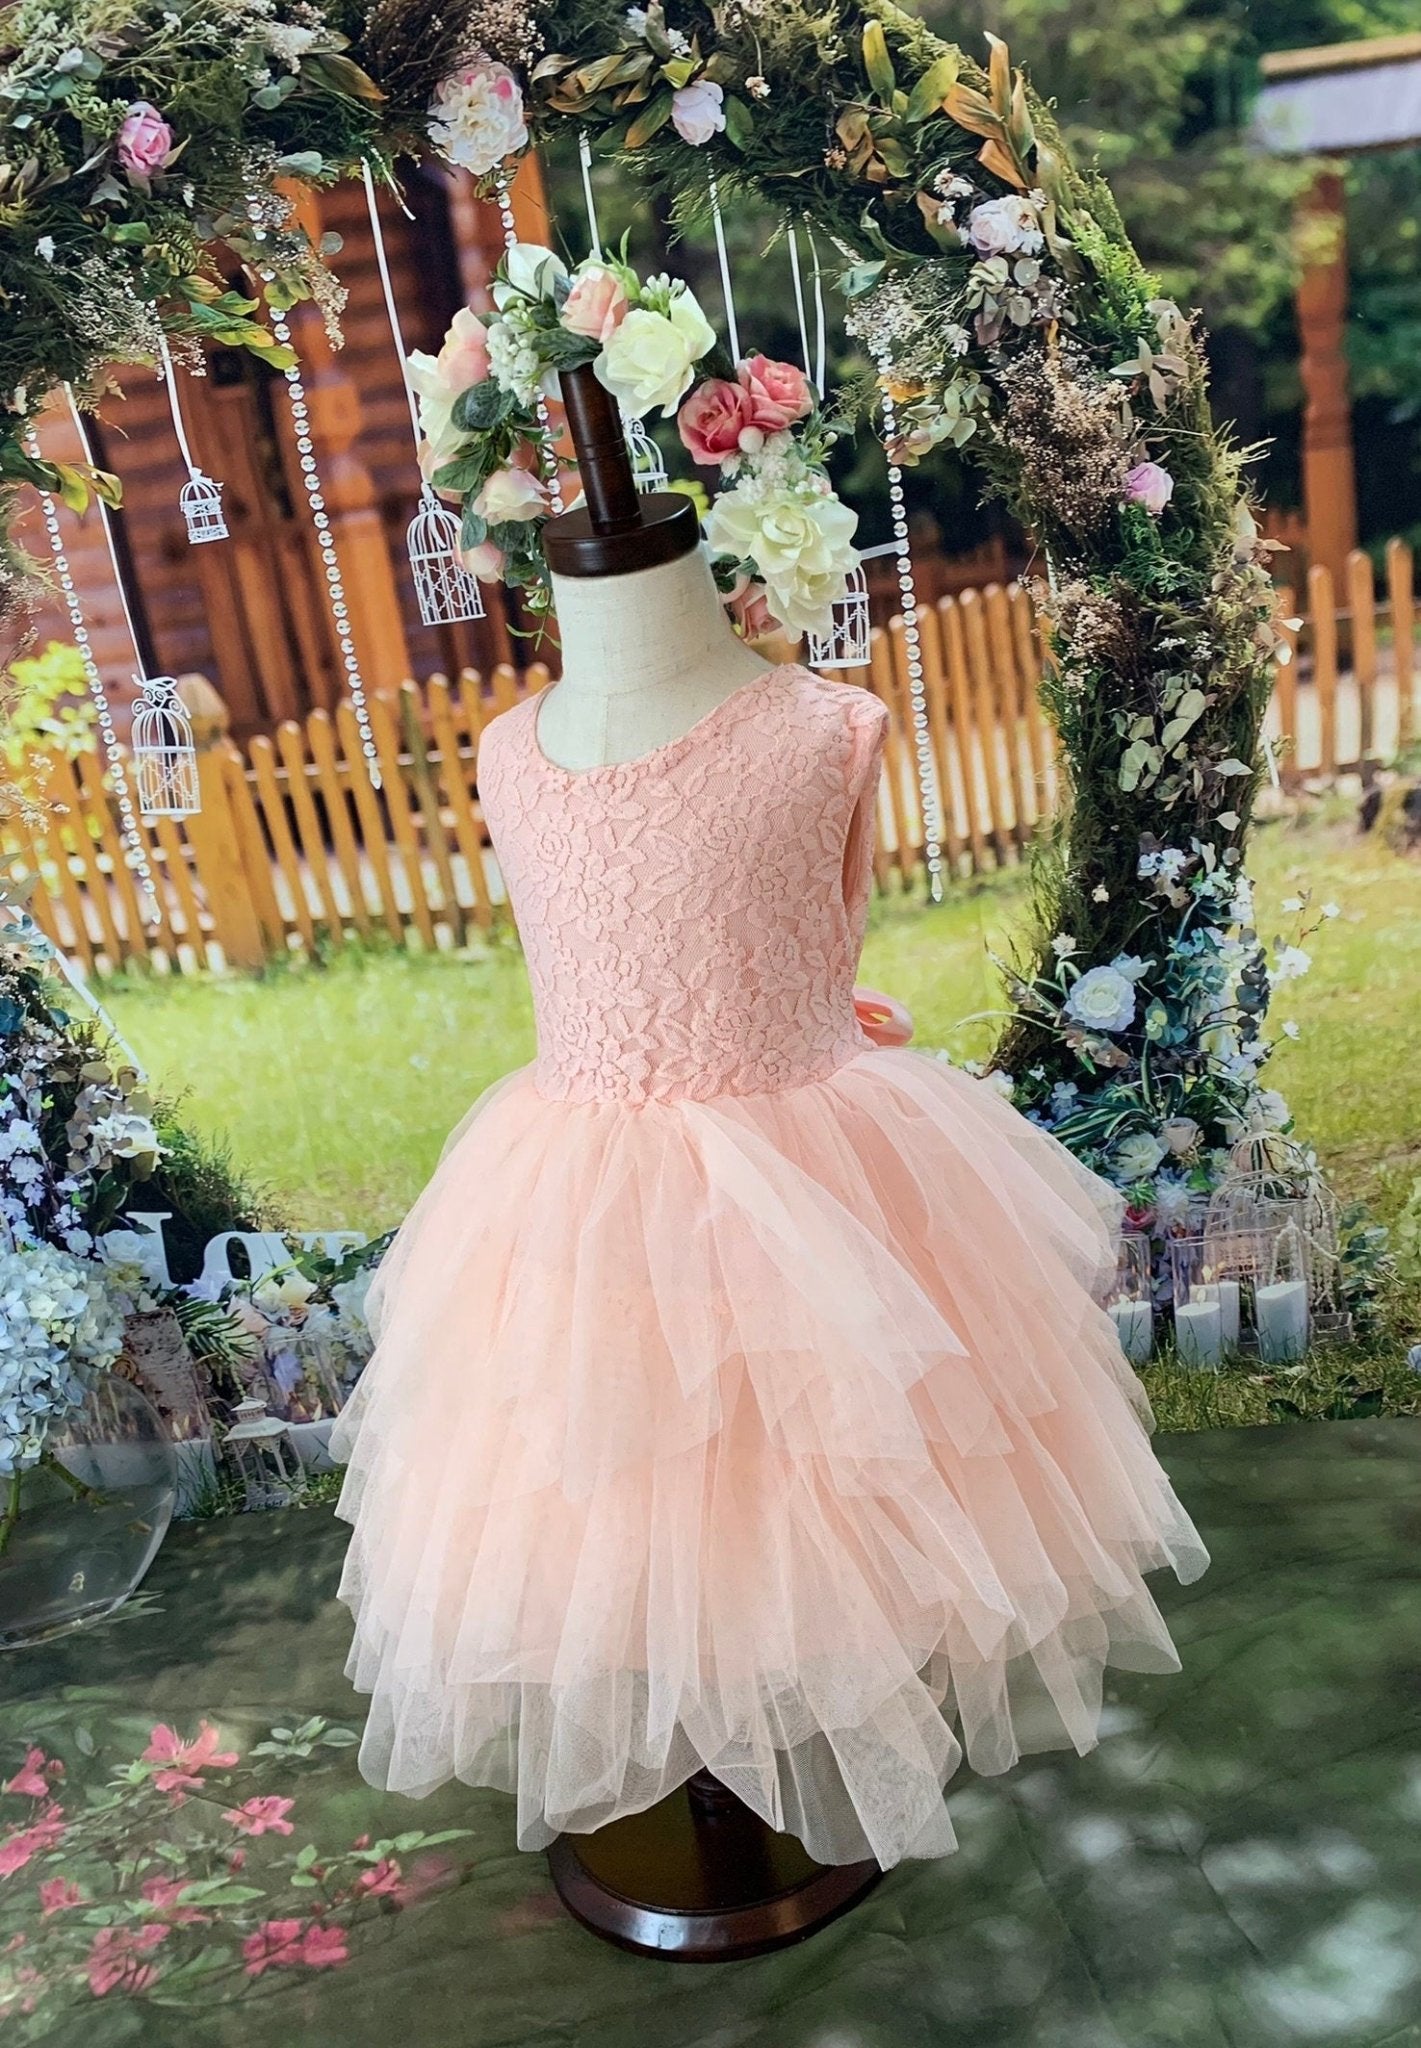 Elegant Baby Girl's Pink Satin Tulle Tutu Lace Dress for Special Occasions - TinySweetPeaBoutique